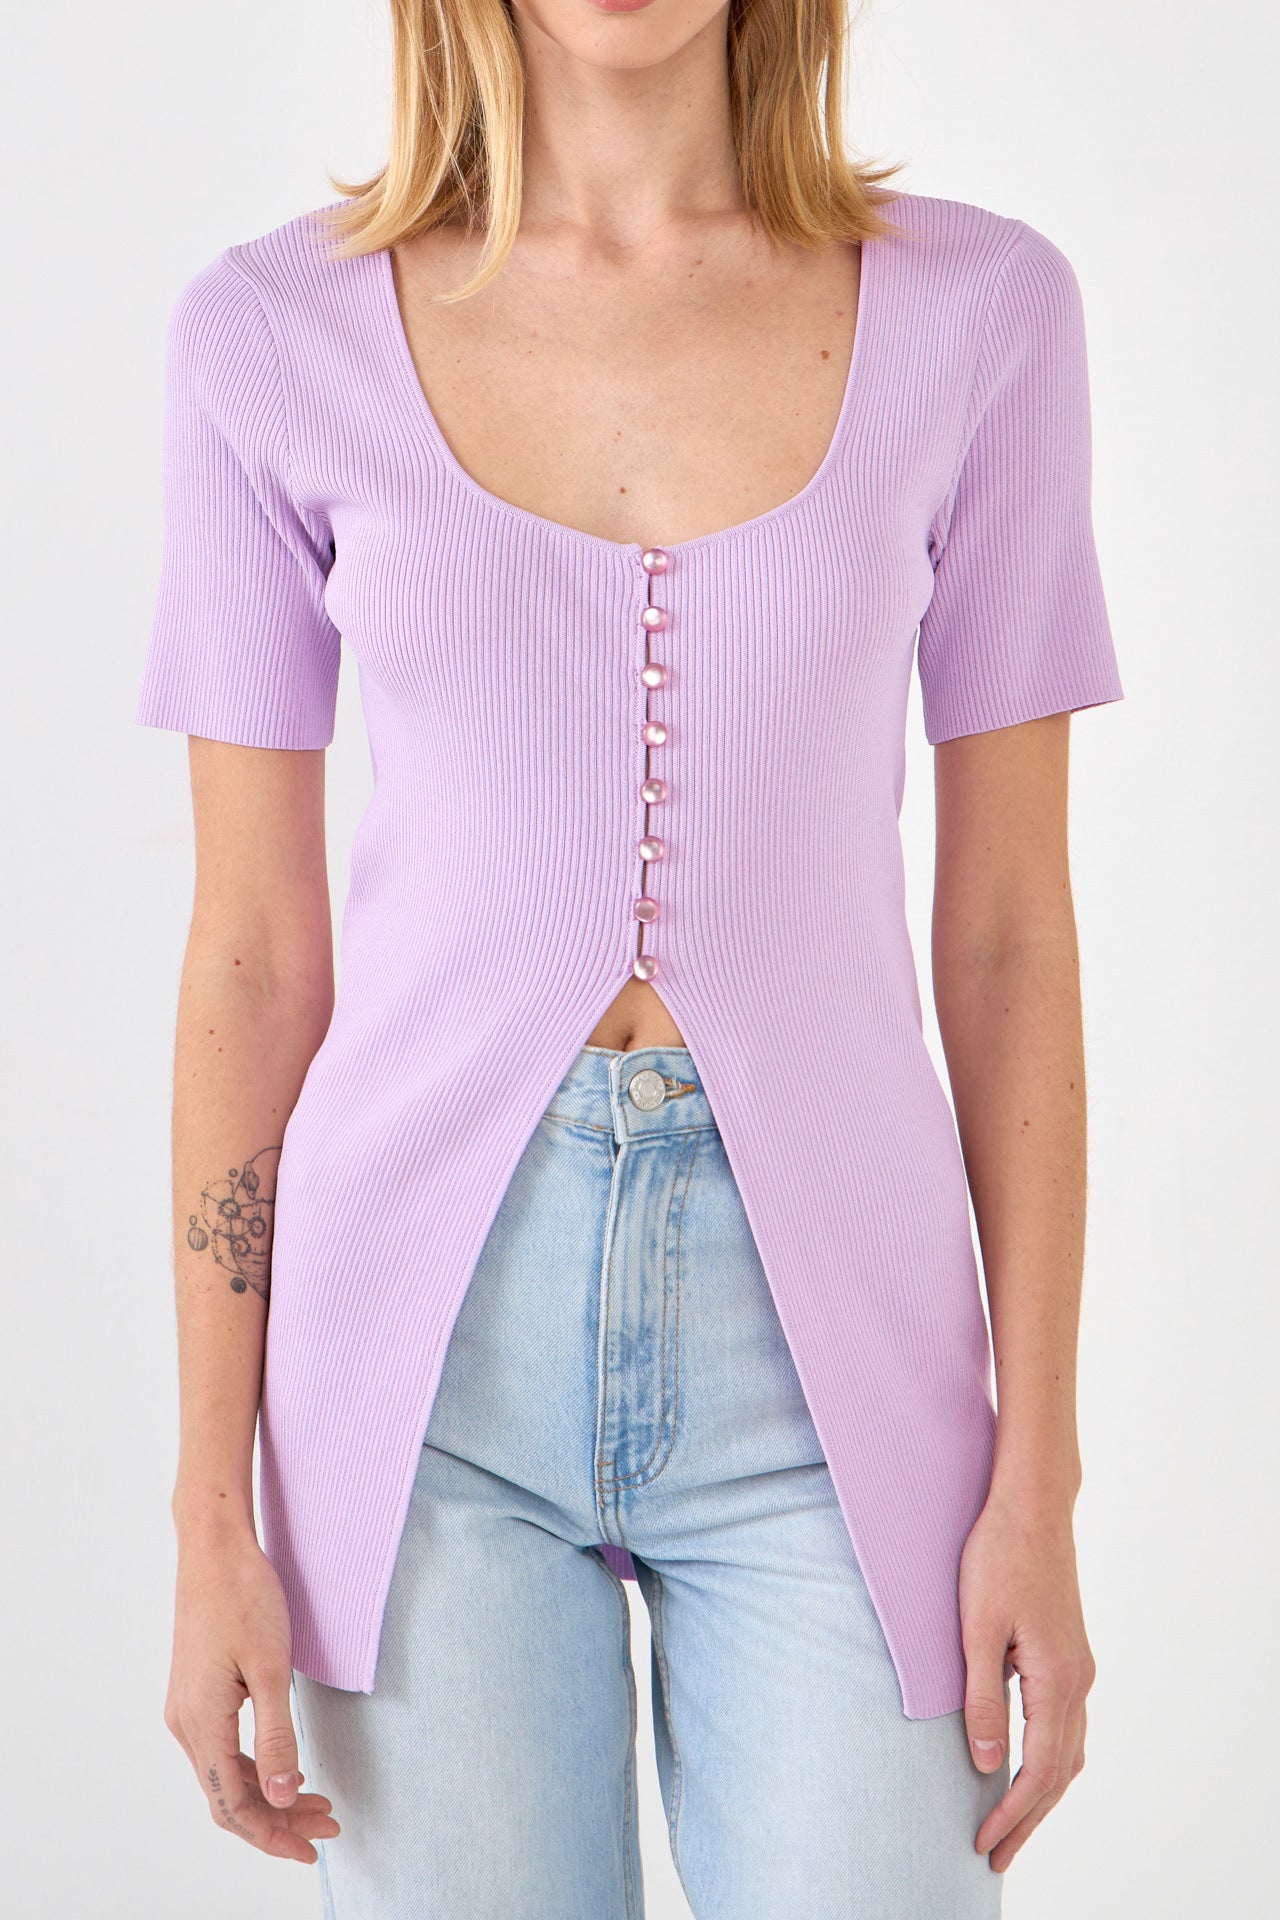 Endless Rose - Short Sleeve Long Knit Button Up - Tops in Women's Clothing available at endlessrose.com